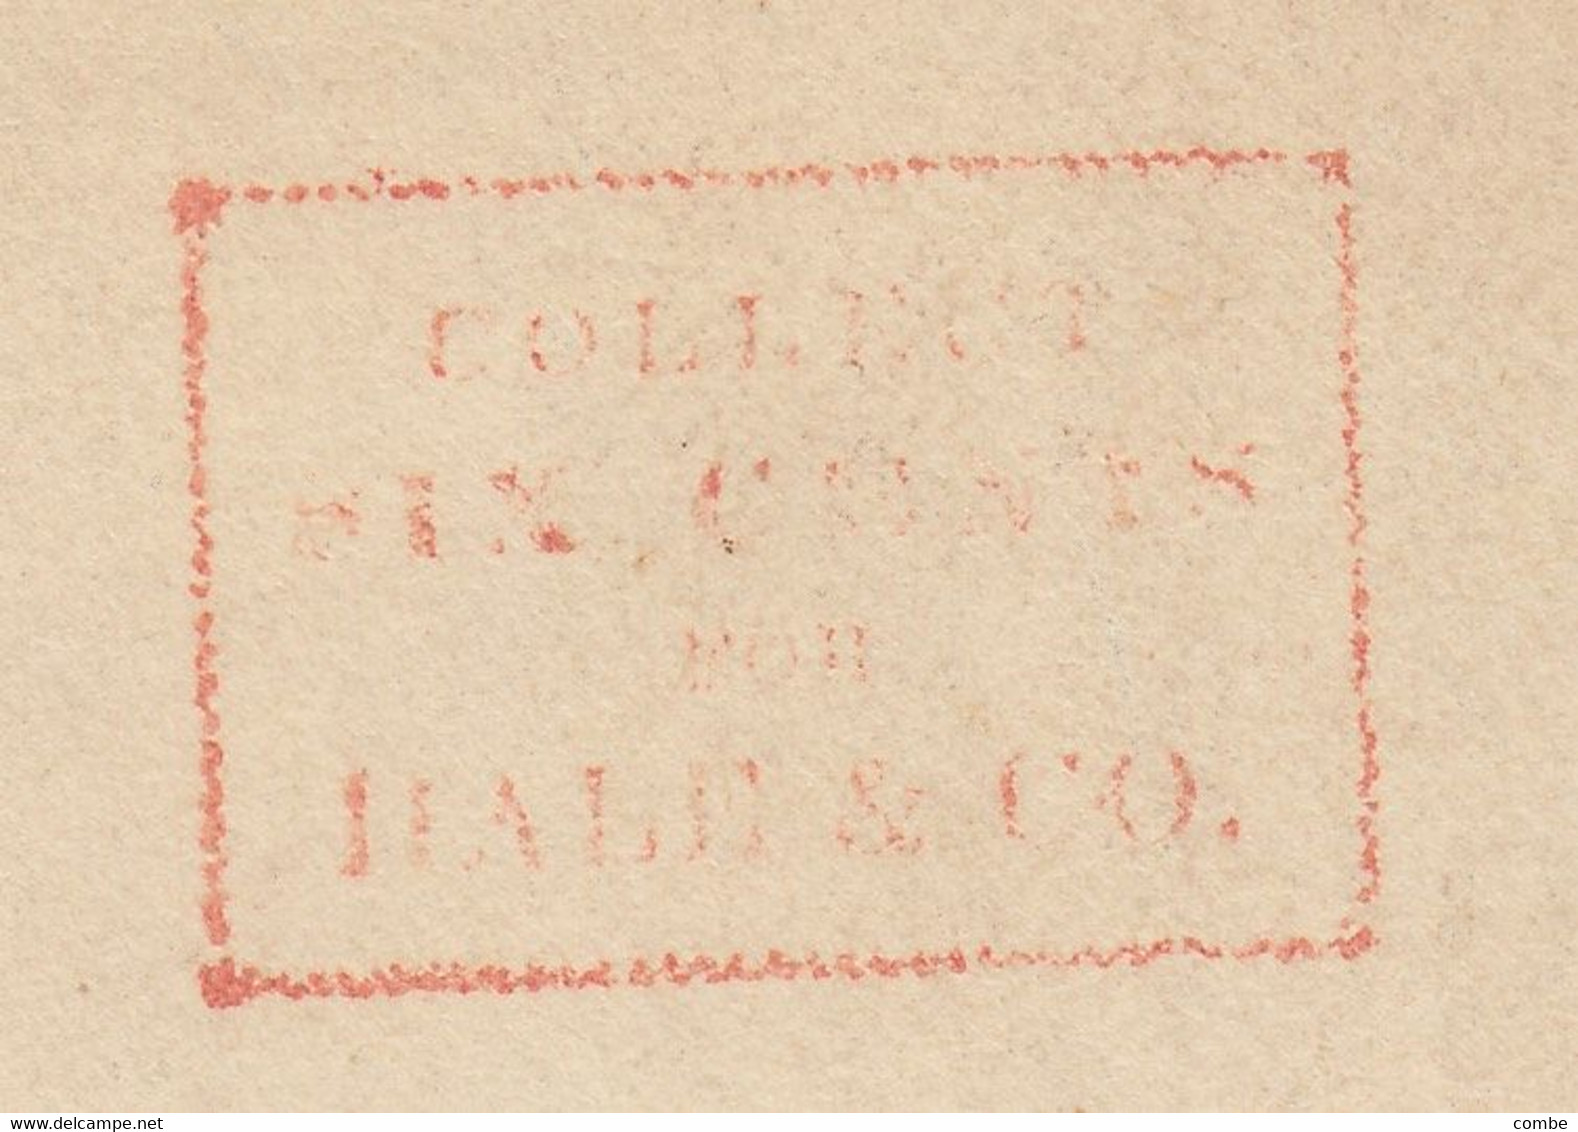 COVER. RED CANCEL  "COLLECT SIX CENTS FOR HALE & C°". NEW-YORK. NO TEXT      / 2 - …-1845 Prephilately